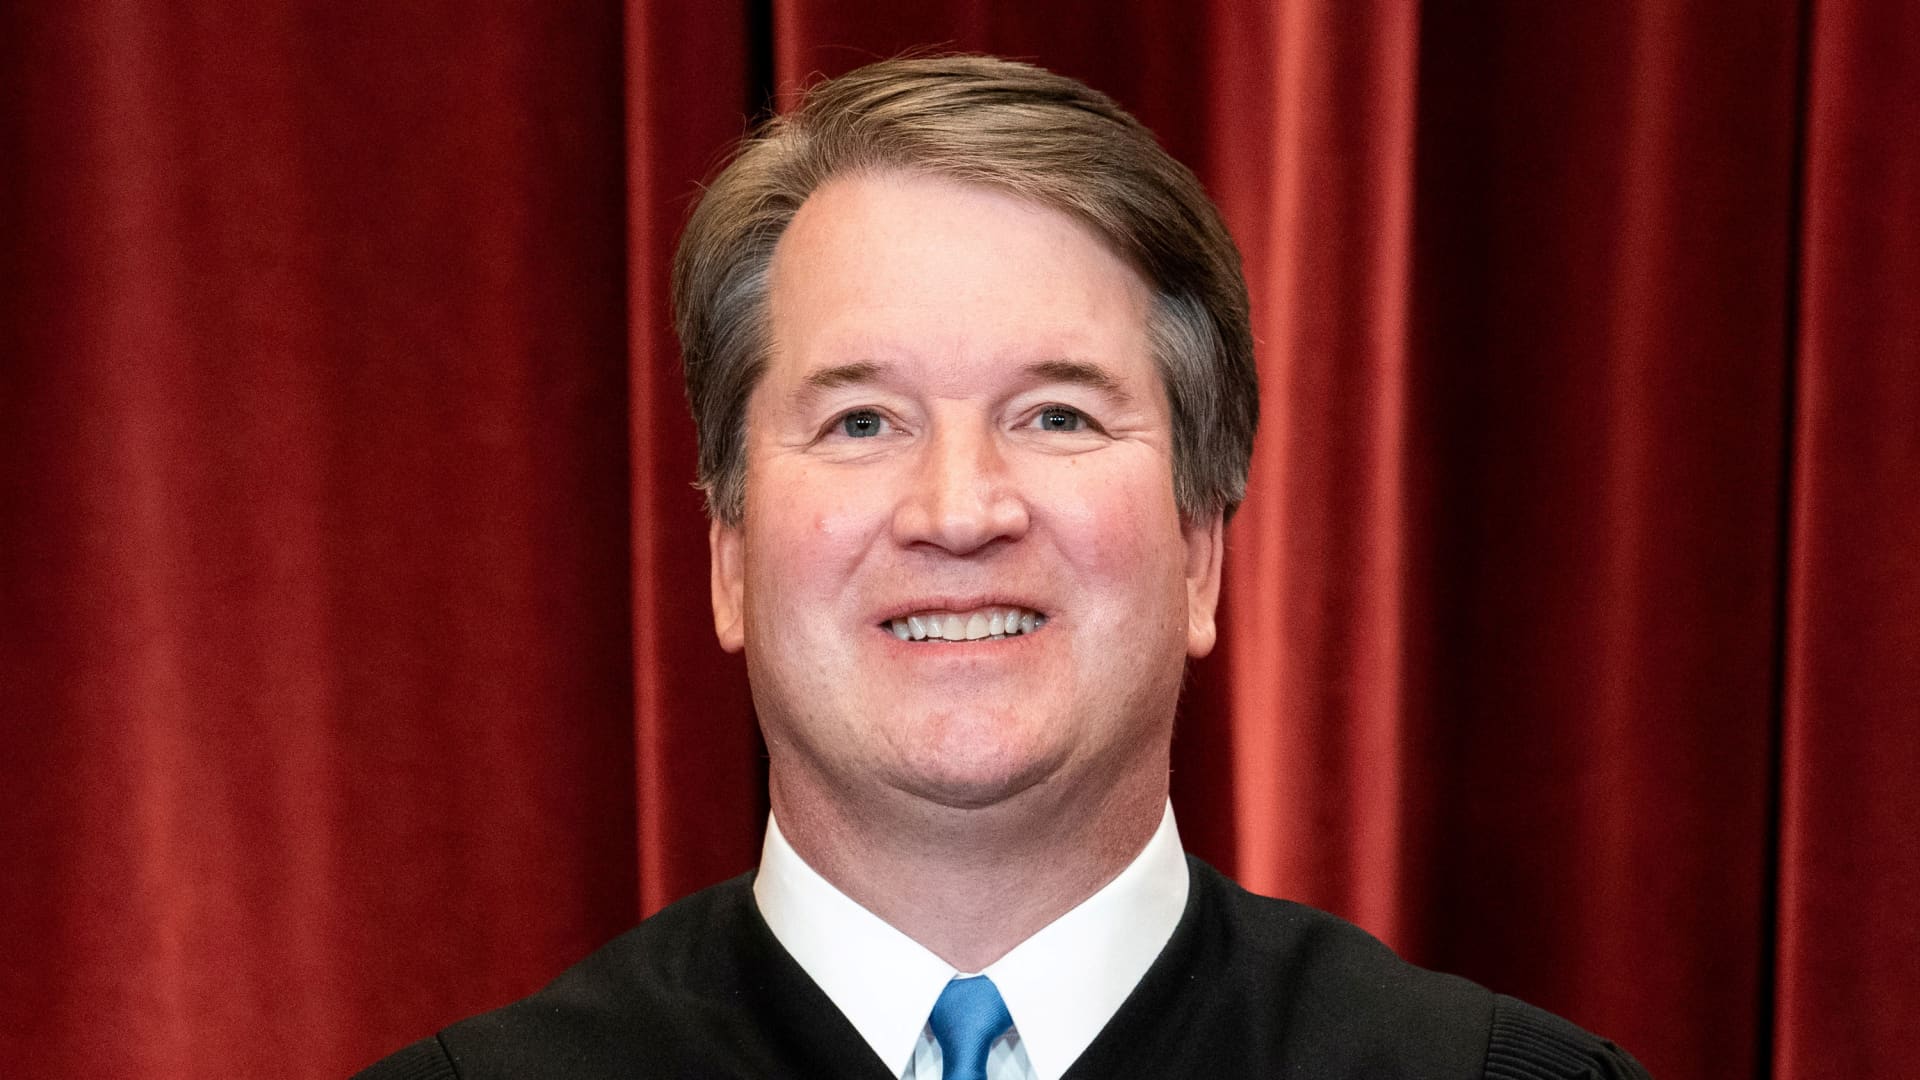 Armed man arrested outside Brett Kavanaugh’s home after threatening Supreme Court justice